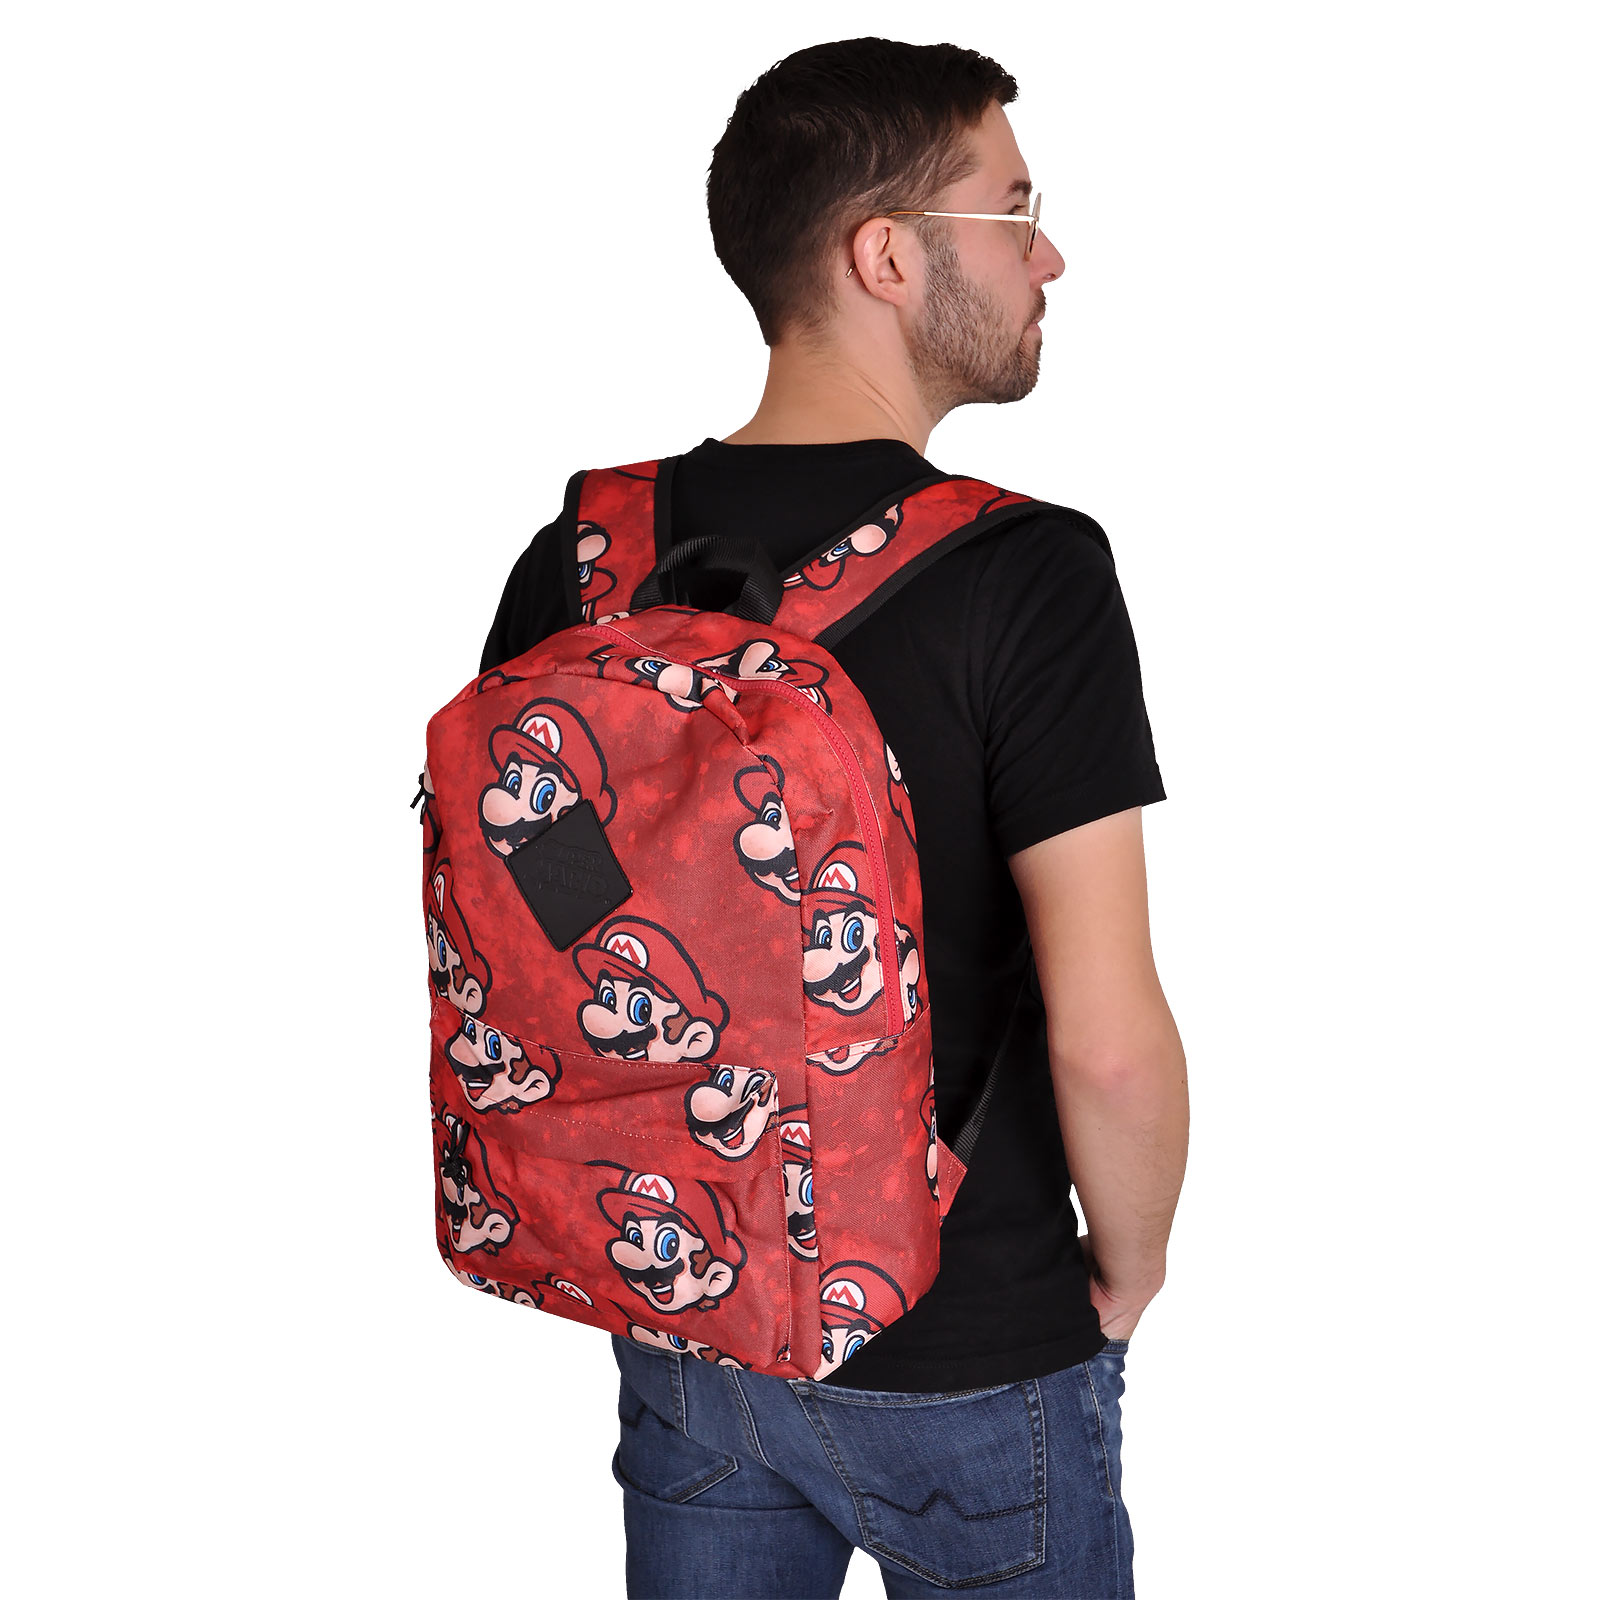 Super Mario - Faces Backpack Red